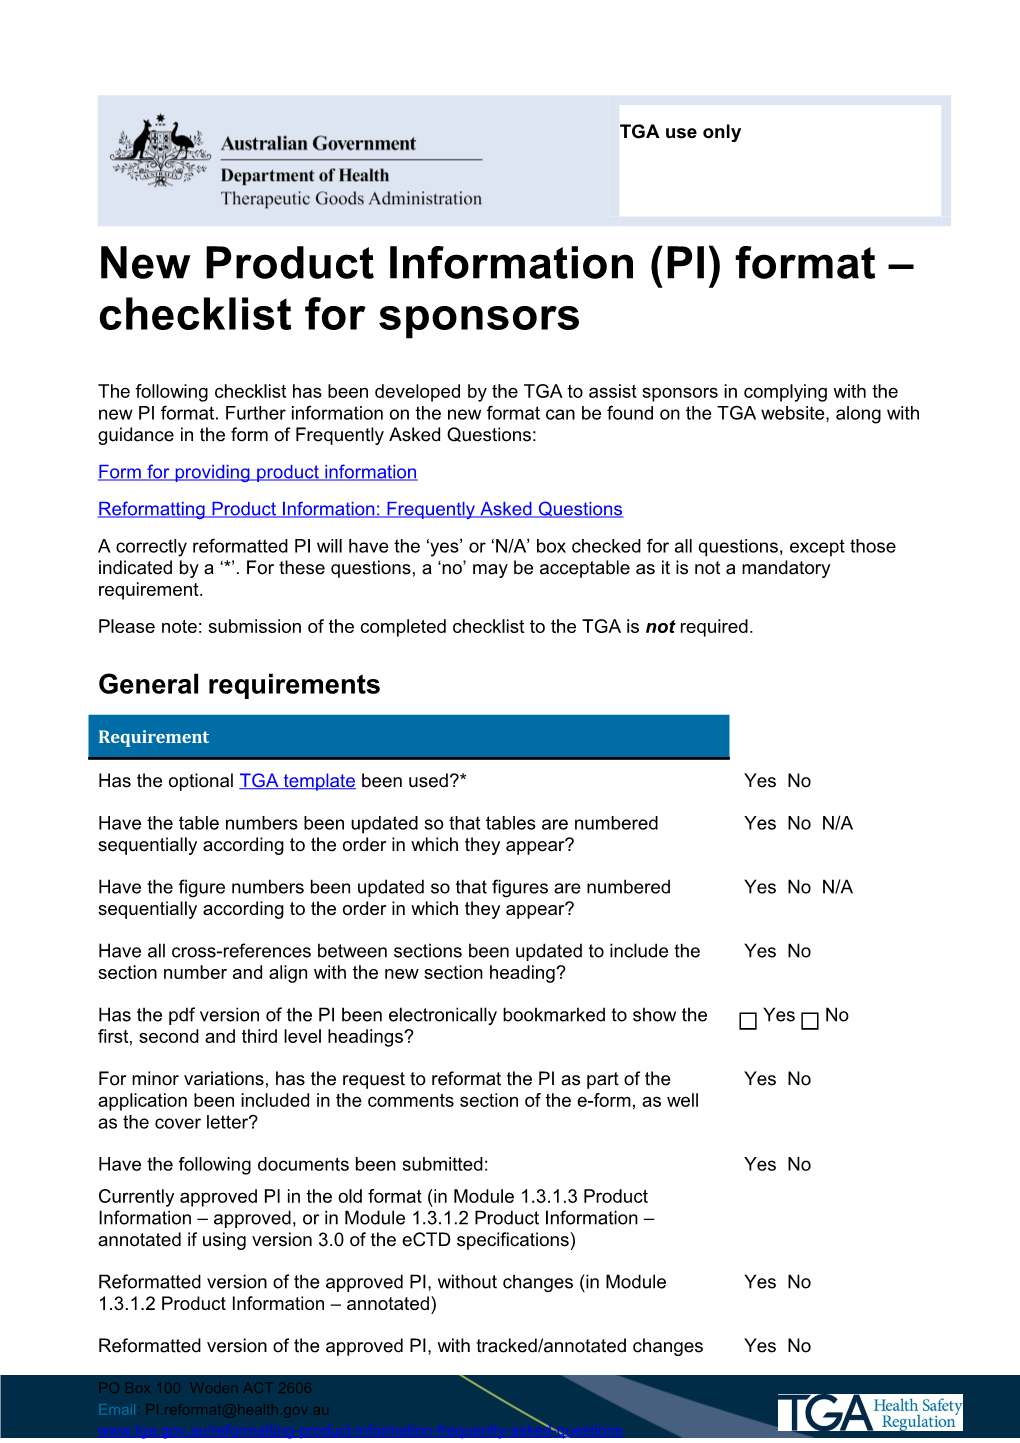 New Product Information (PI) Format Checklist for Sponsors